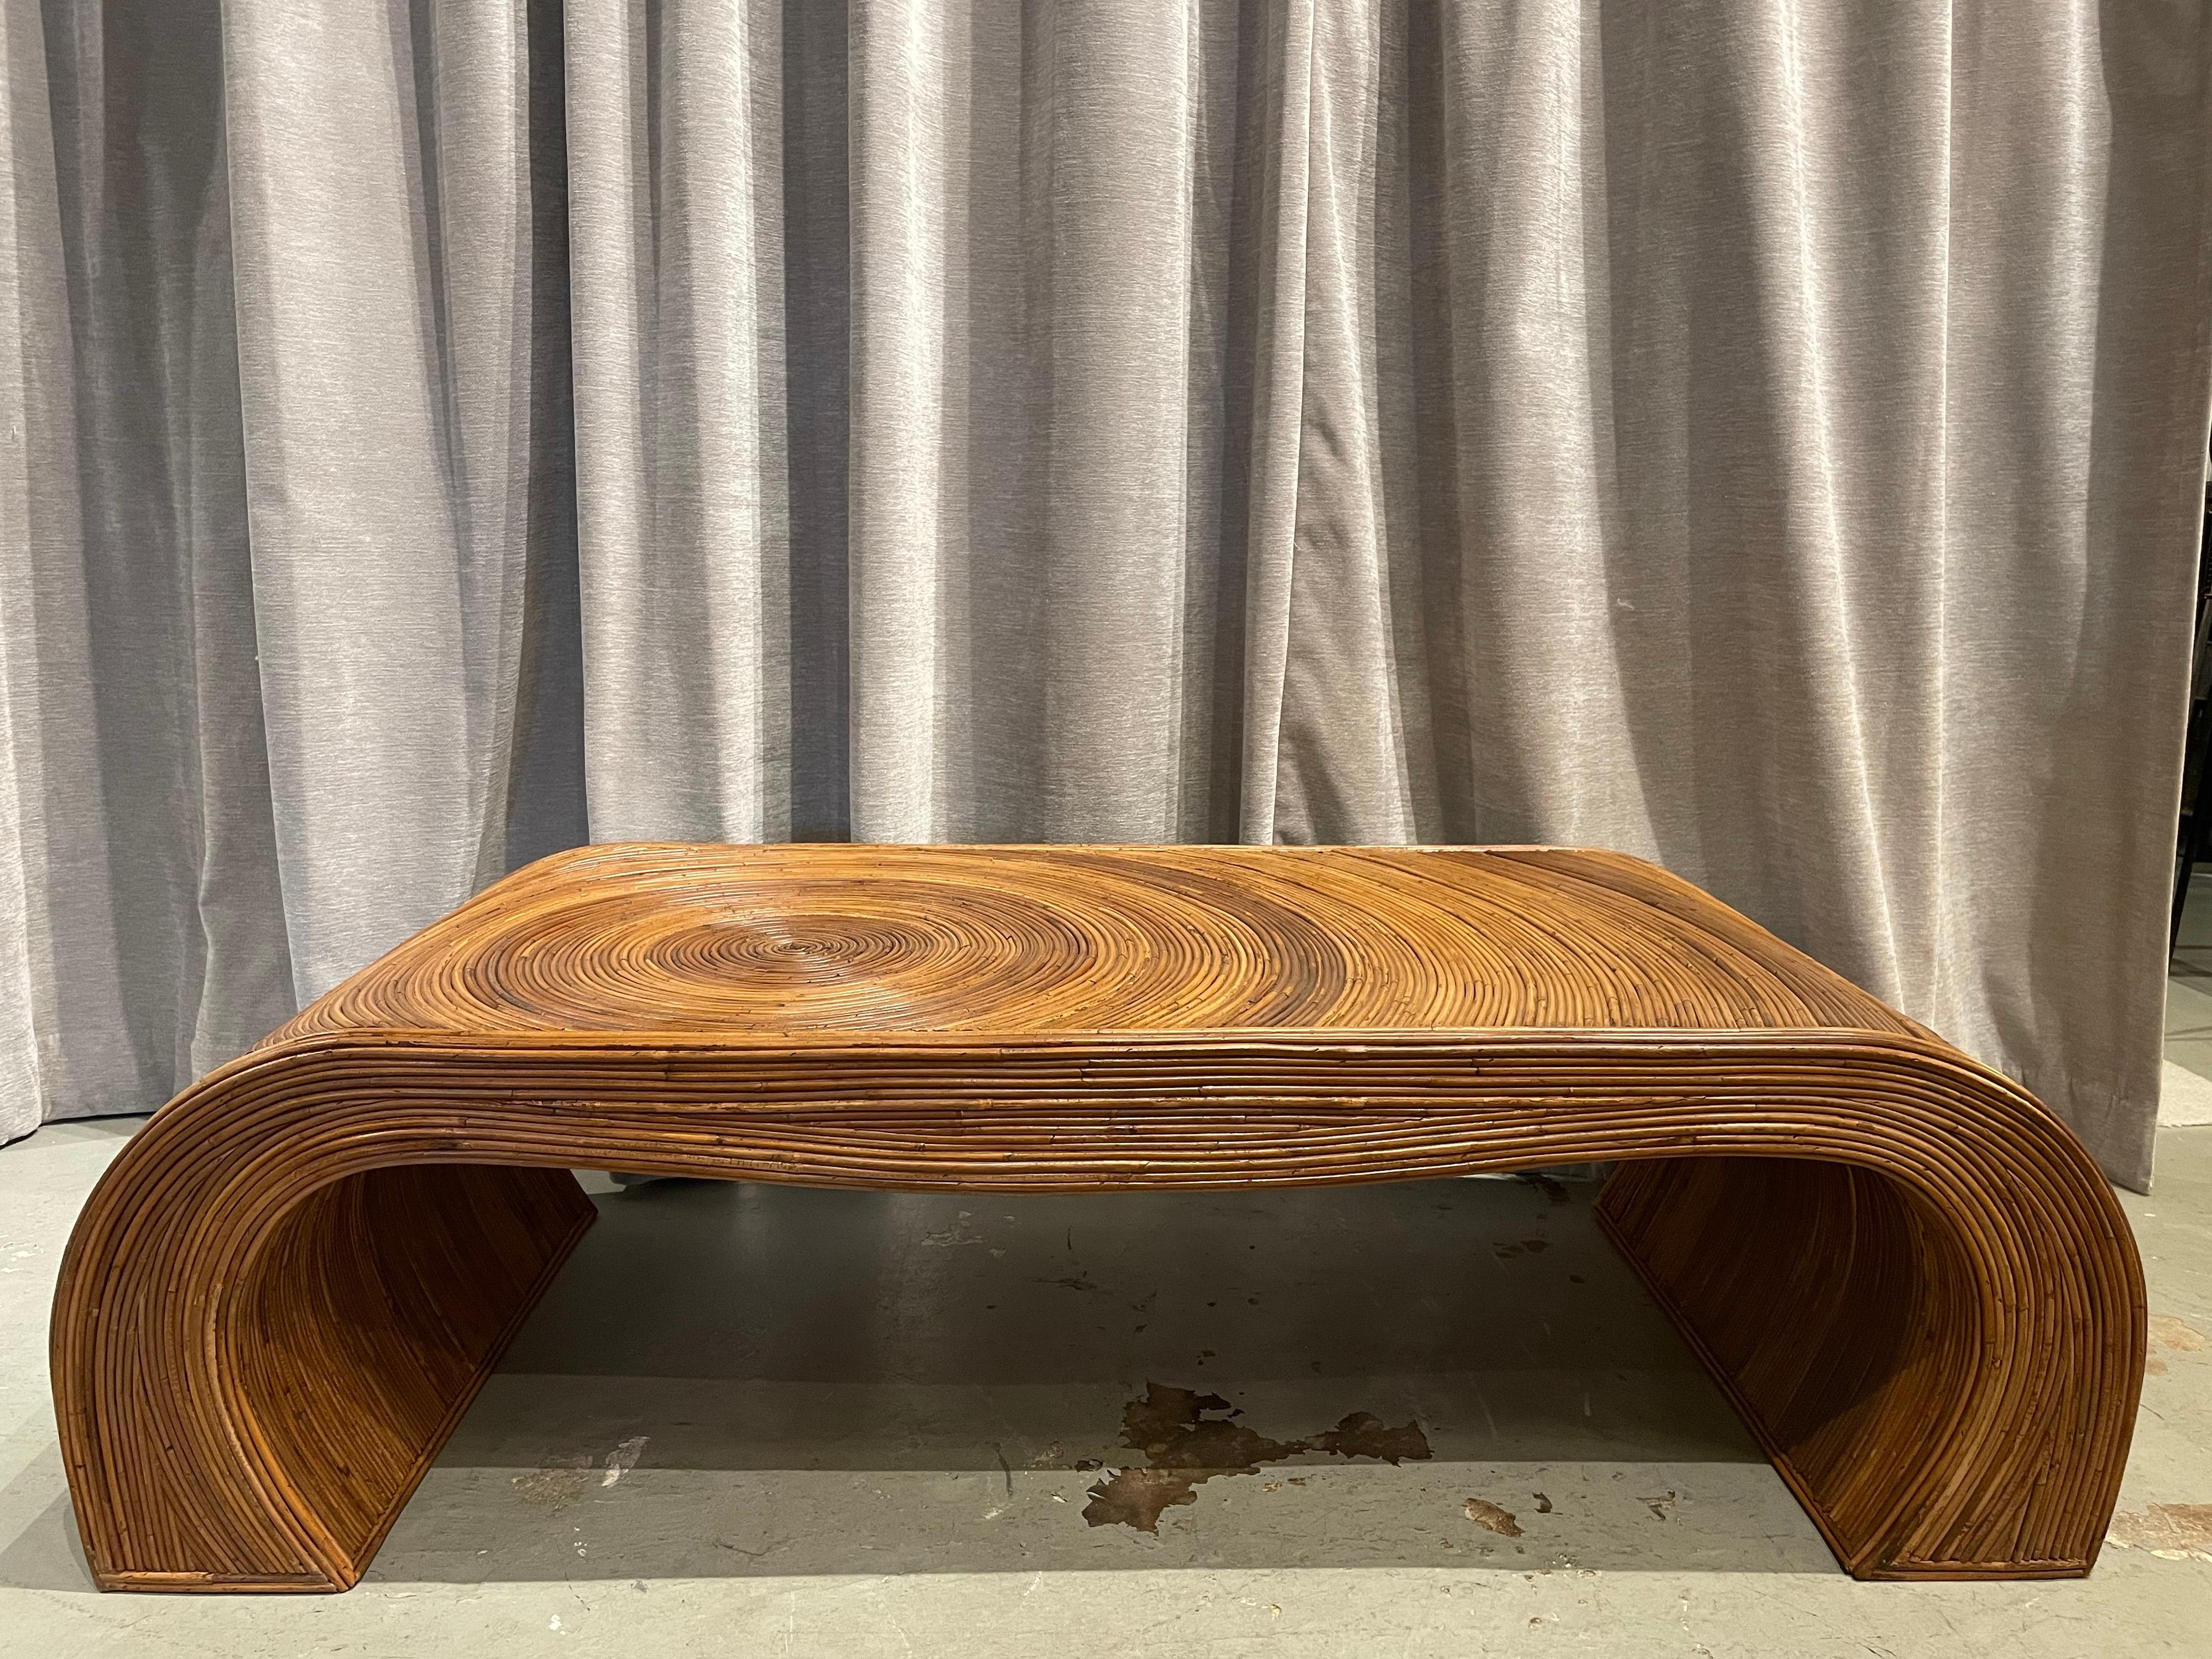 This is a very special and artfully worked coffee table made with split reed bamboo in a very intricate design and in arch form. The bent split reeds vary in color and tonality to give a richness of organic earth tones.